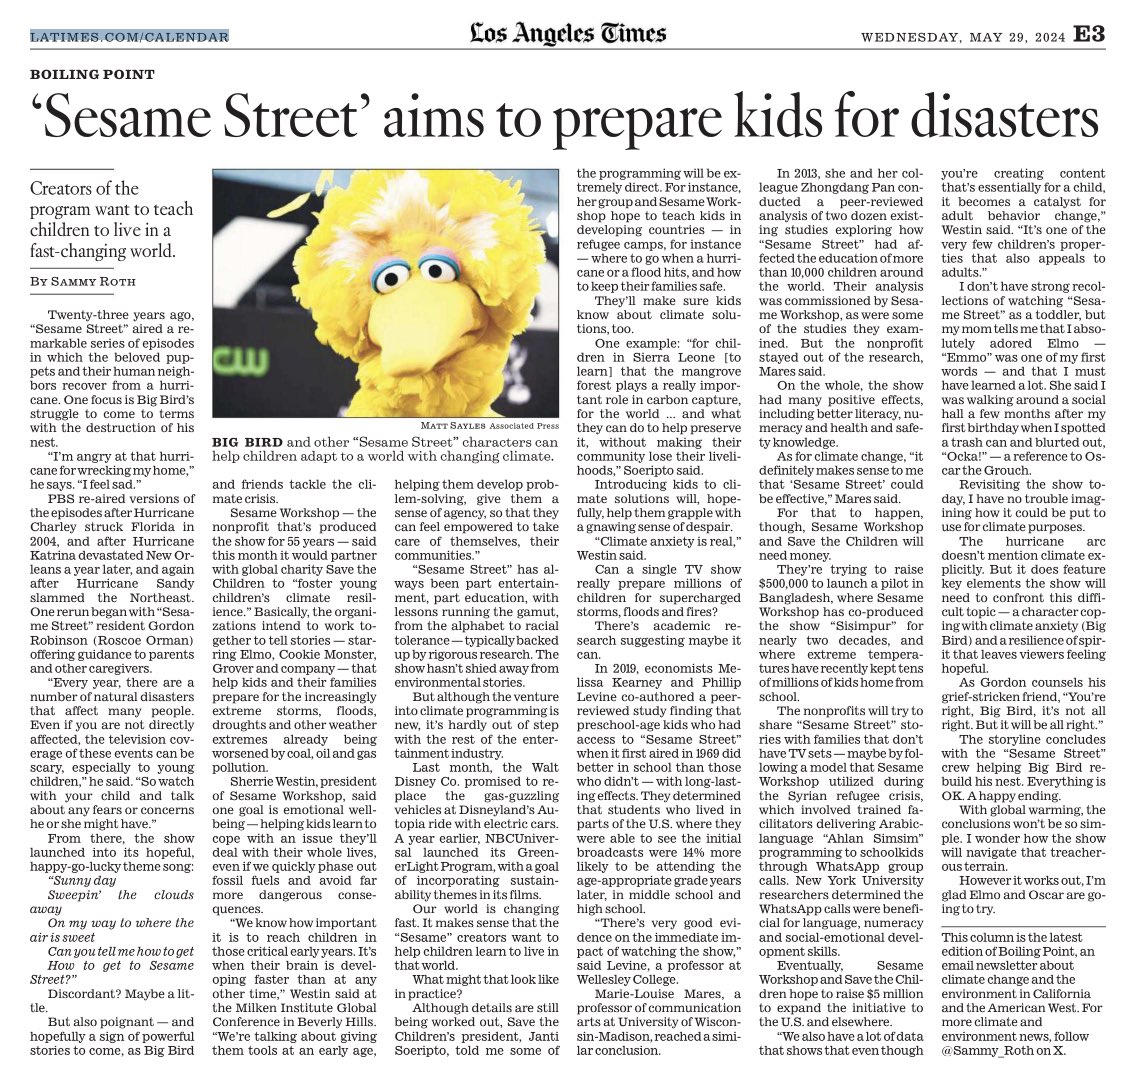 “Sunny day Sweepin’ the clouds away On my way to where the air is sweet…” In today’s @latimes: My column on @sesamestreet’s new initiative to teach kids and caregivers about climate change, and how they can protect themselves — starting in Bangladesh: latimes.com/environment/ne…